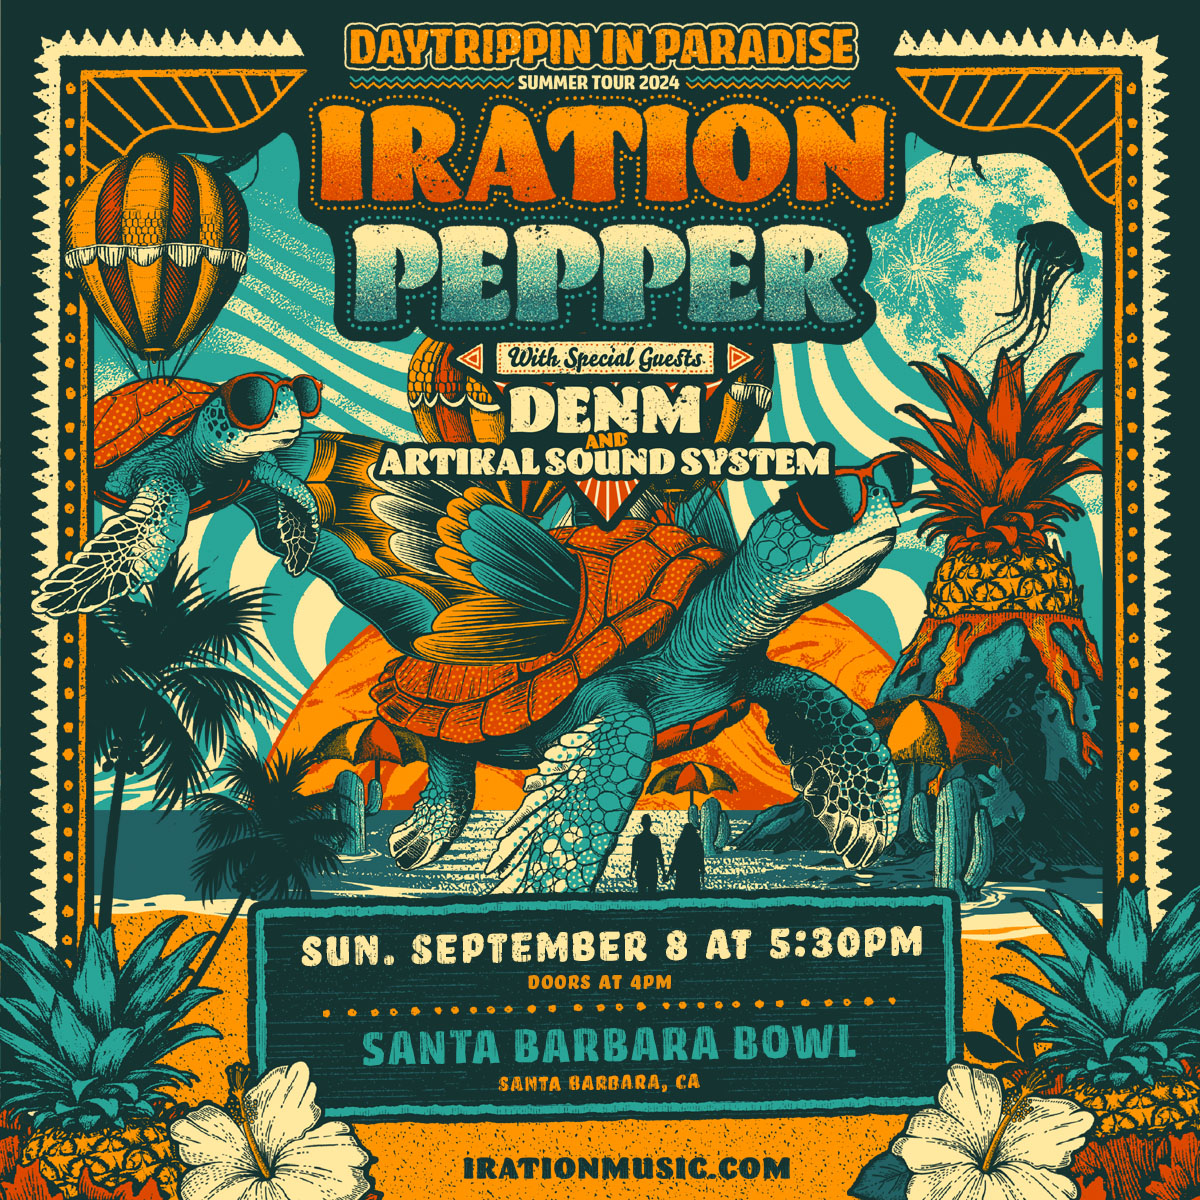 📣 @Iration & @Pepperlive tour heads to @SBBowl on 9/8! W/ @iamDENM, & @ArtikalSound! 🎟️ Tix on sale on 3/28 @10am! 🎟️ Buy tix at Bowl Box Office or on sbbowl.com 🎶All Bowl news & info: sbbowl.com #SantaBarbaraBowl #SBBowl #SBBowlSeason2024 #Iration